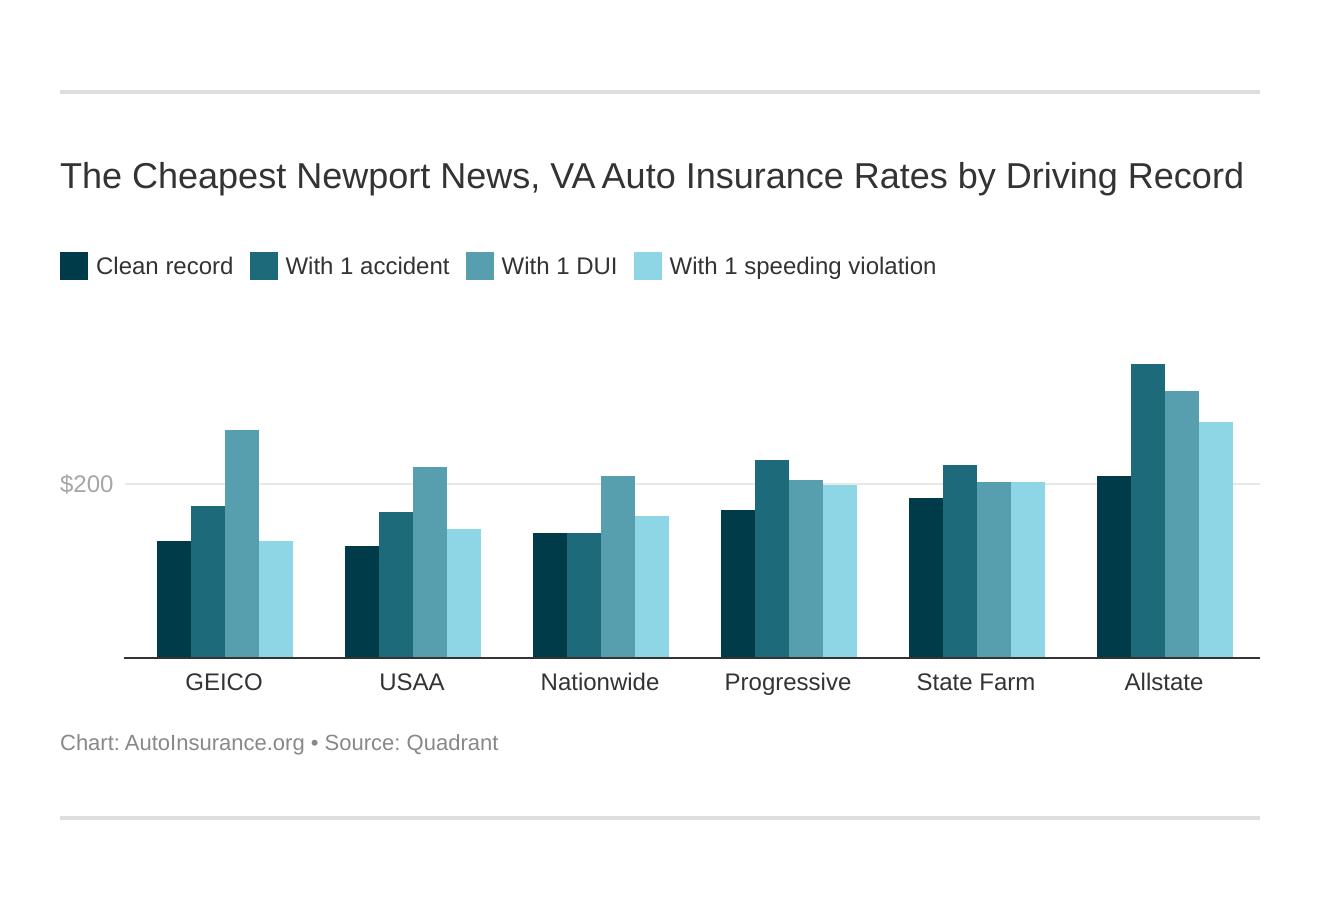 The Cheapest Newport News, VA Auto Insurance Rates by Driving Record